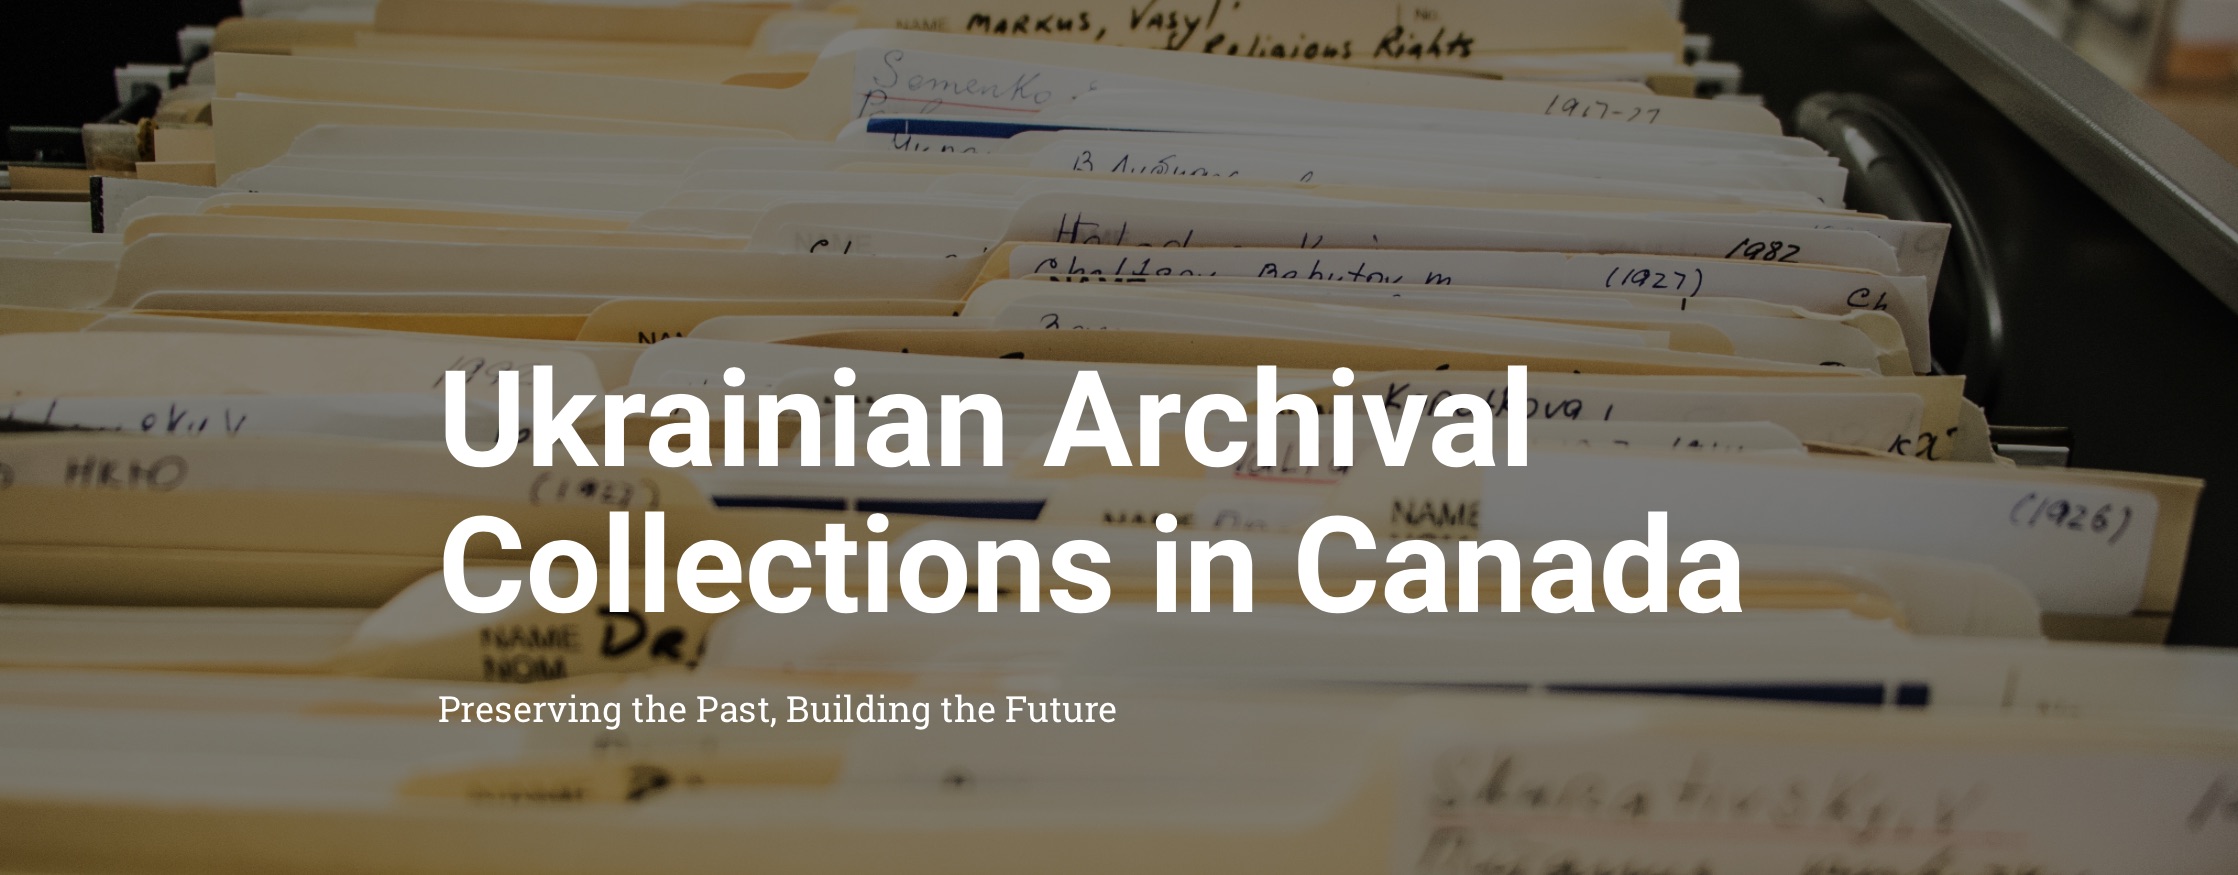 Ukrainian Archival Collections in Canada conference